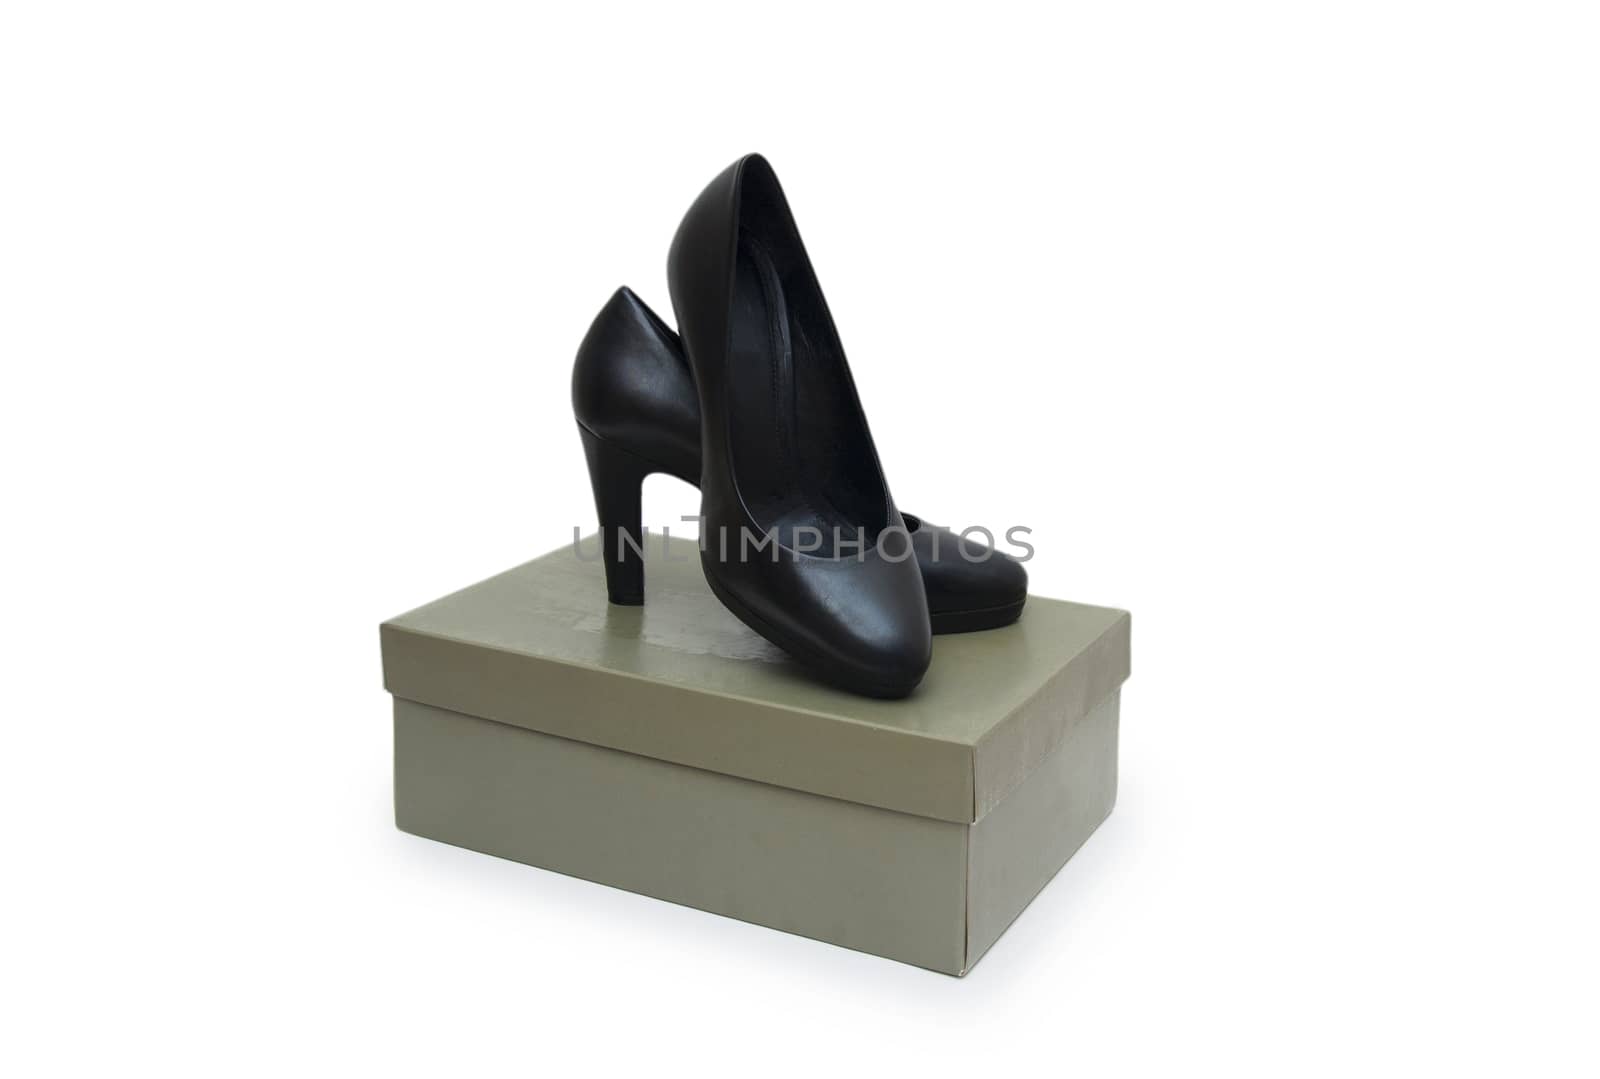 female shoes on a white background